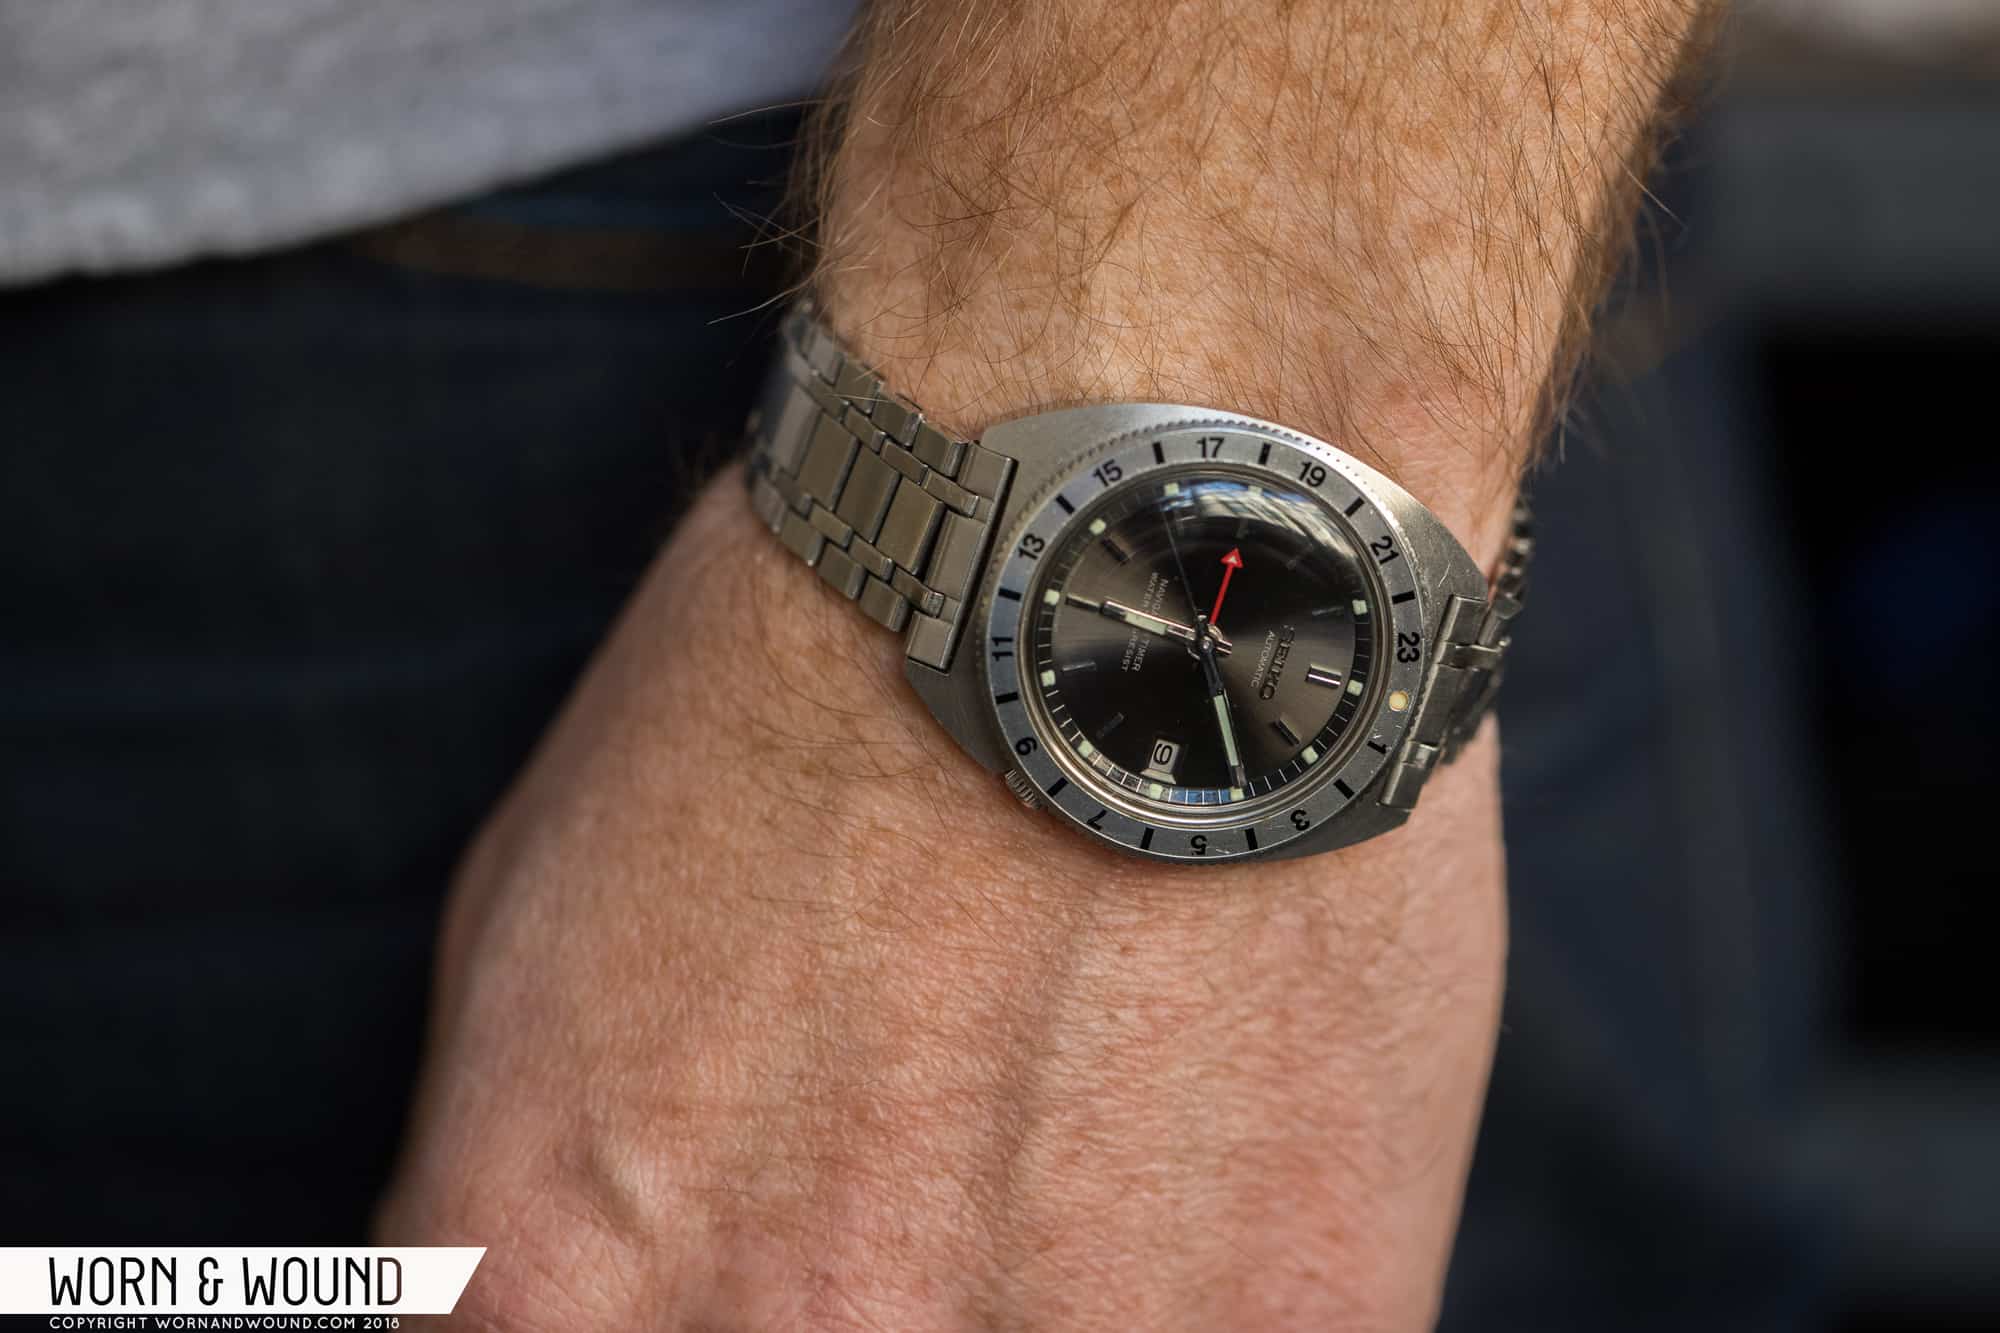 VIDEO) My Watch: Collecting Seiko, Military, and Vintage Tool Watches with  Jon Gaffney - Worn & Wound